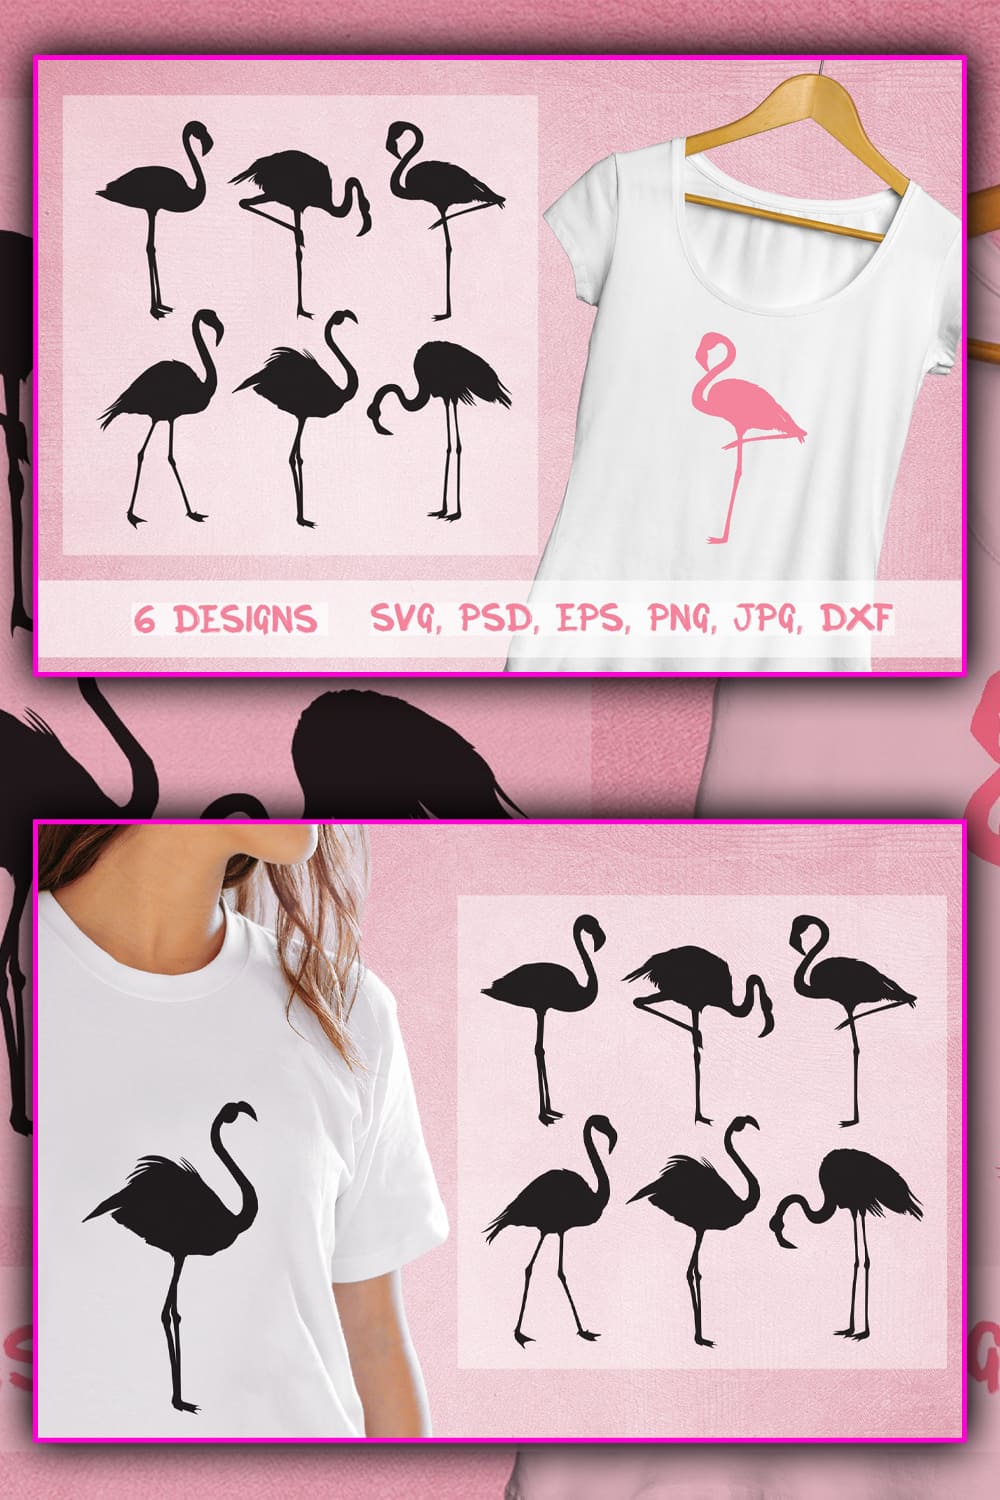 A wonderful image of flamingo silhouettes in black.